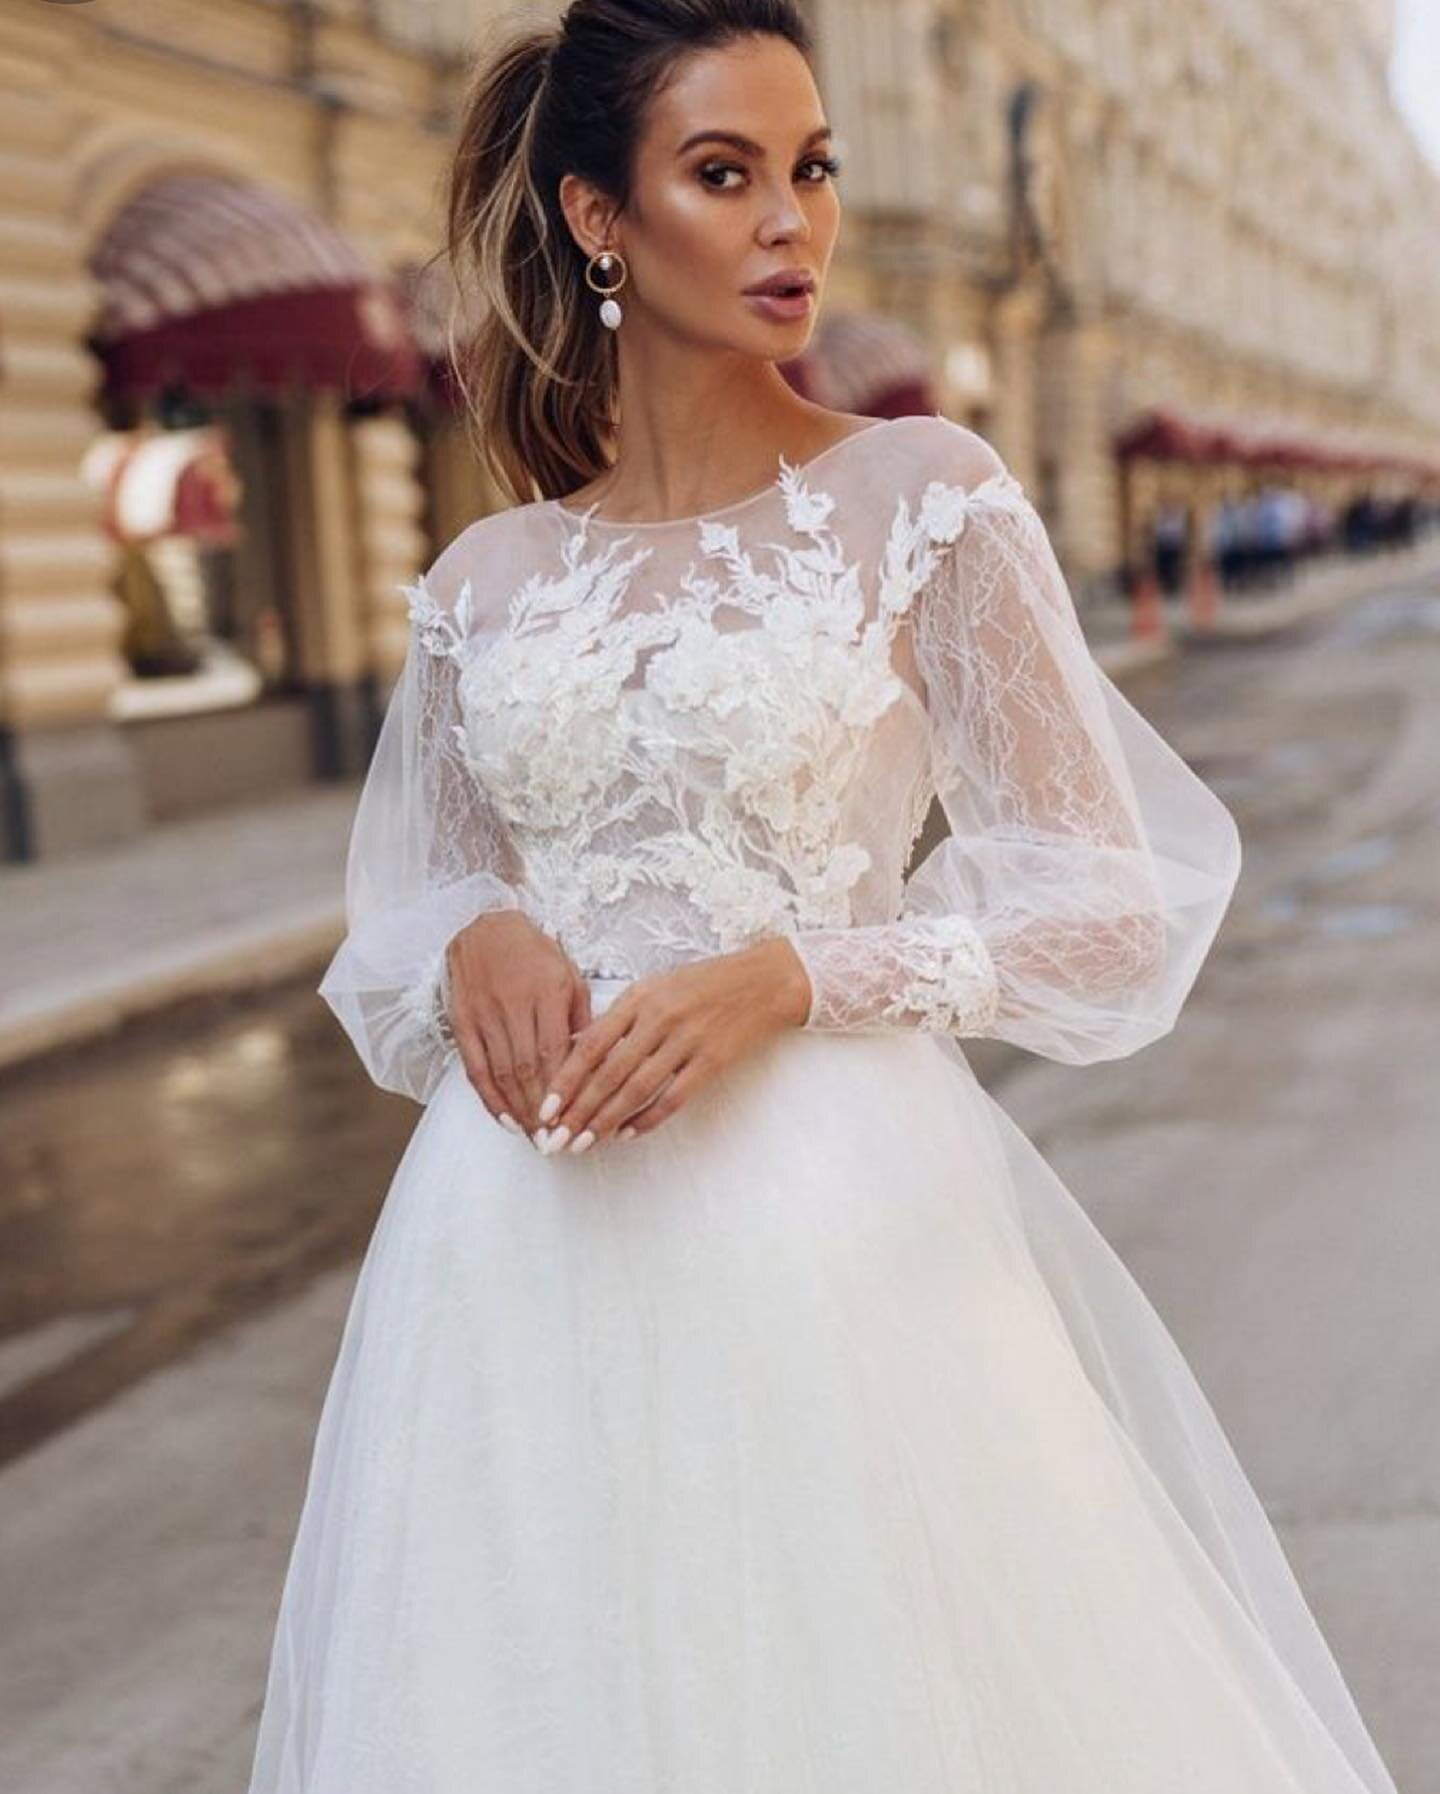 Ultimate Wedding Dress Trends now up in our stories! Check it out first hand! The latest styles + gowns to fit your personality to a T&rsquo; &mdash;- you will not want to miss this!
.

Dreaming of your Wedding Day? Find an ensemble perfect for YOU! 